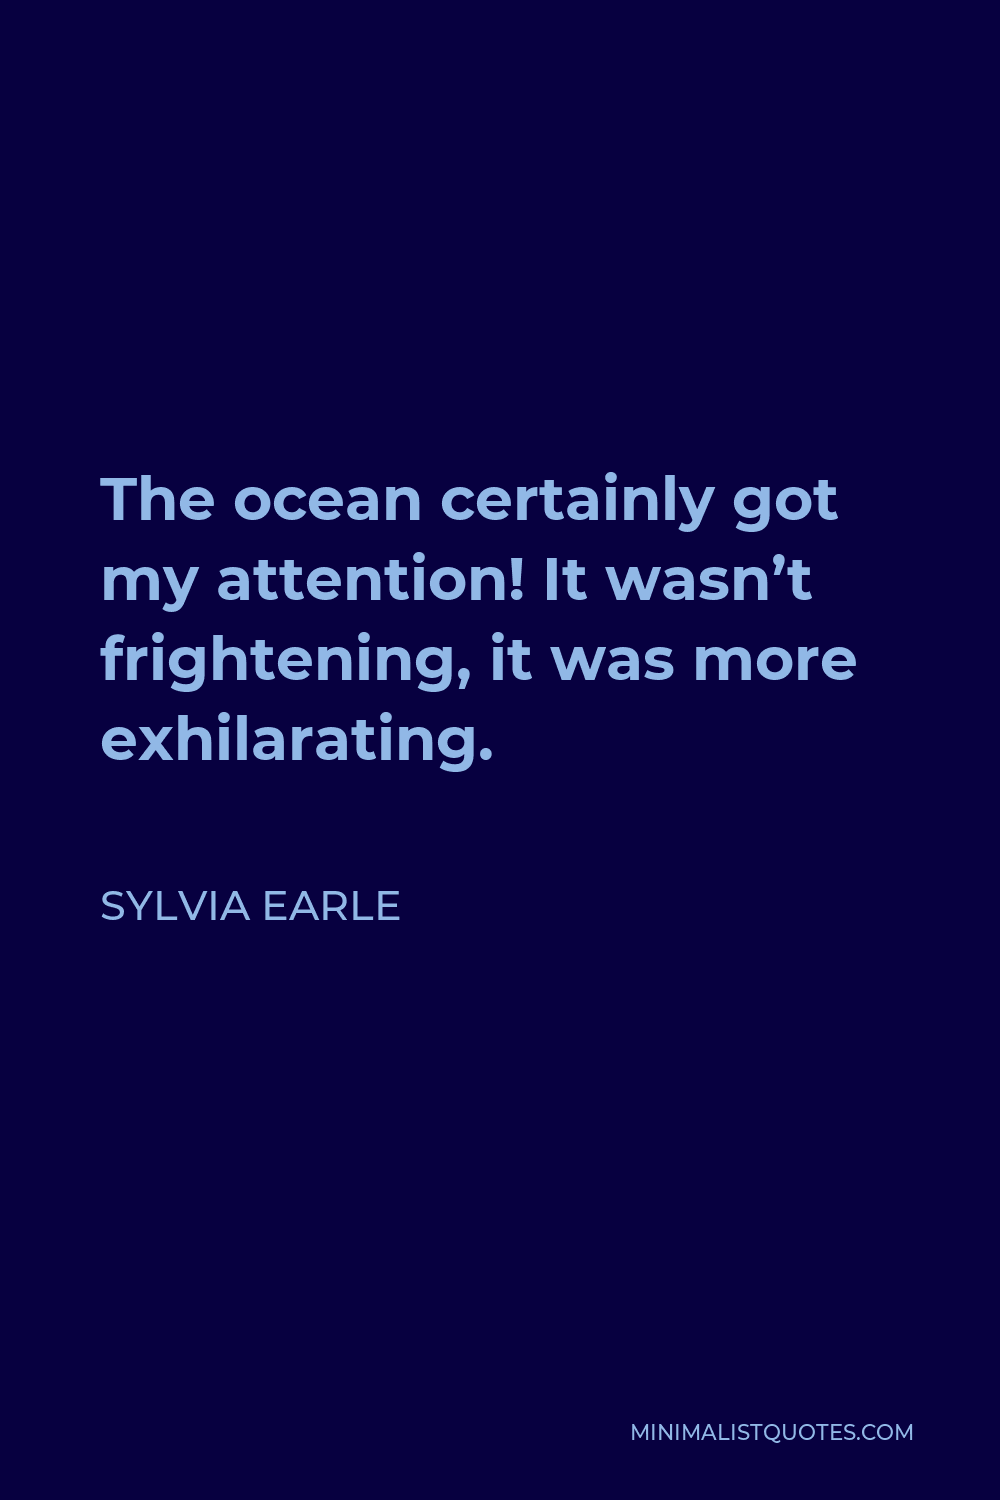 Sylvia Earle Quote The Ocean Certainly Got My Attention It Wasnt Frightening It Was More 2873